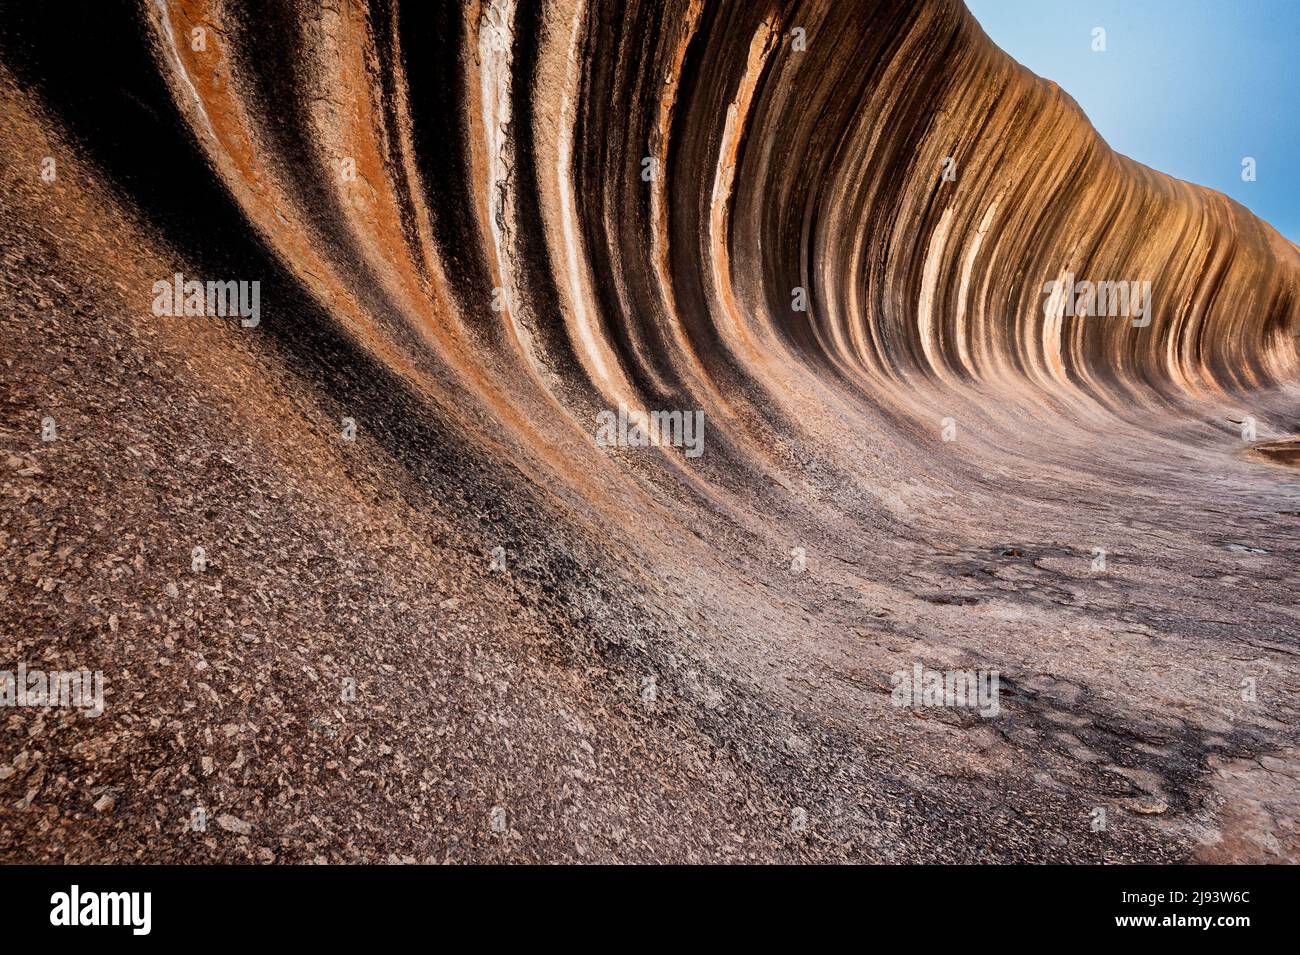 Outstanding Wave Rock in Western Australia's Outback. Stock Photo